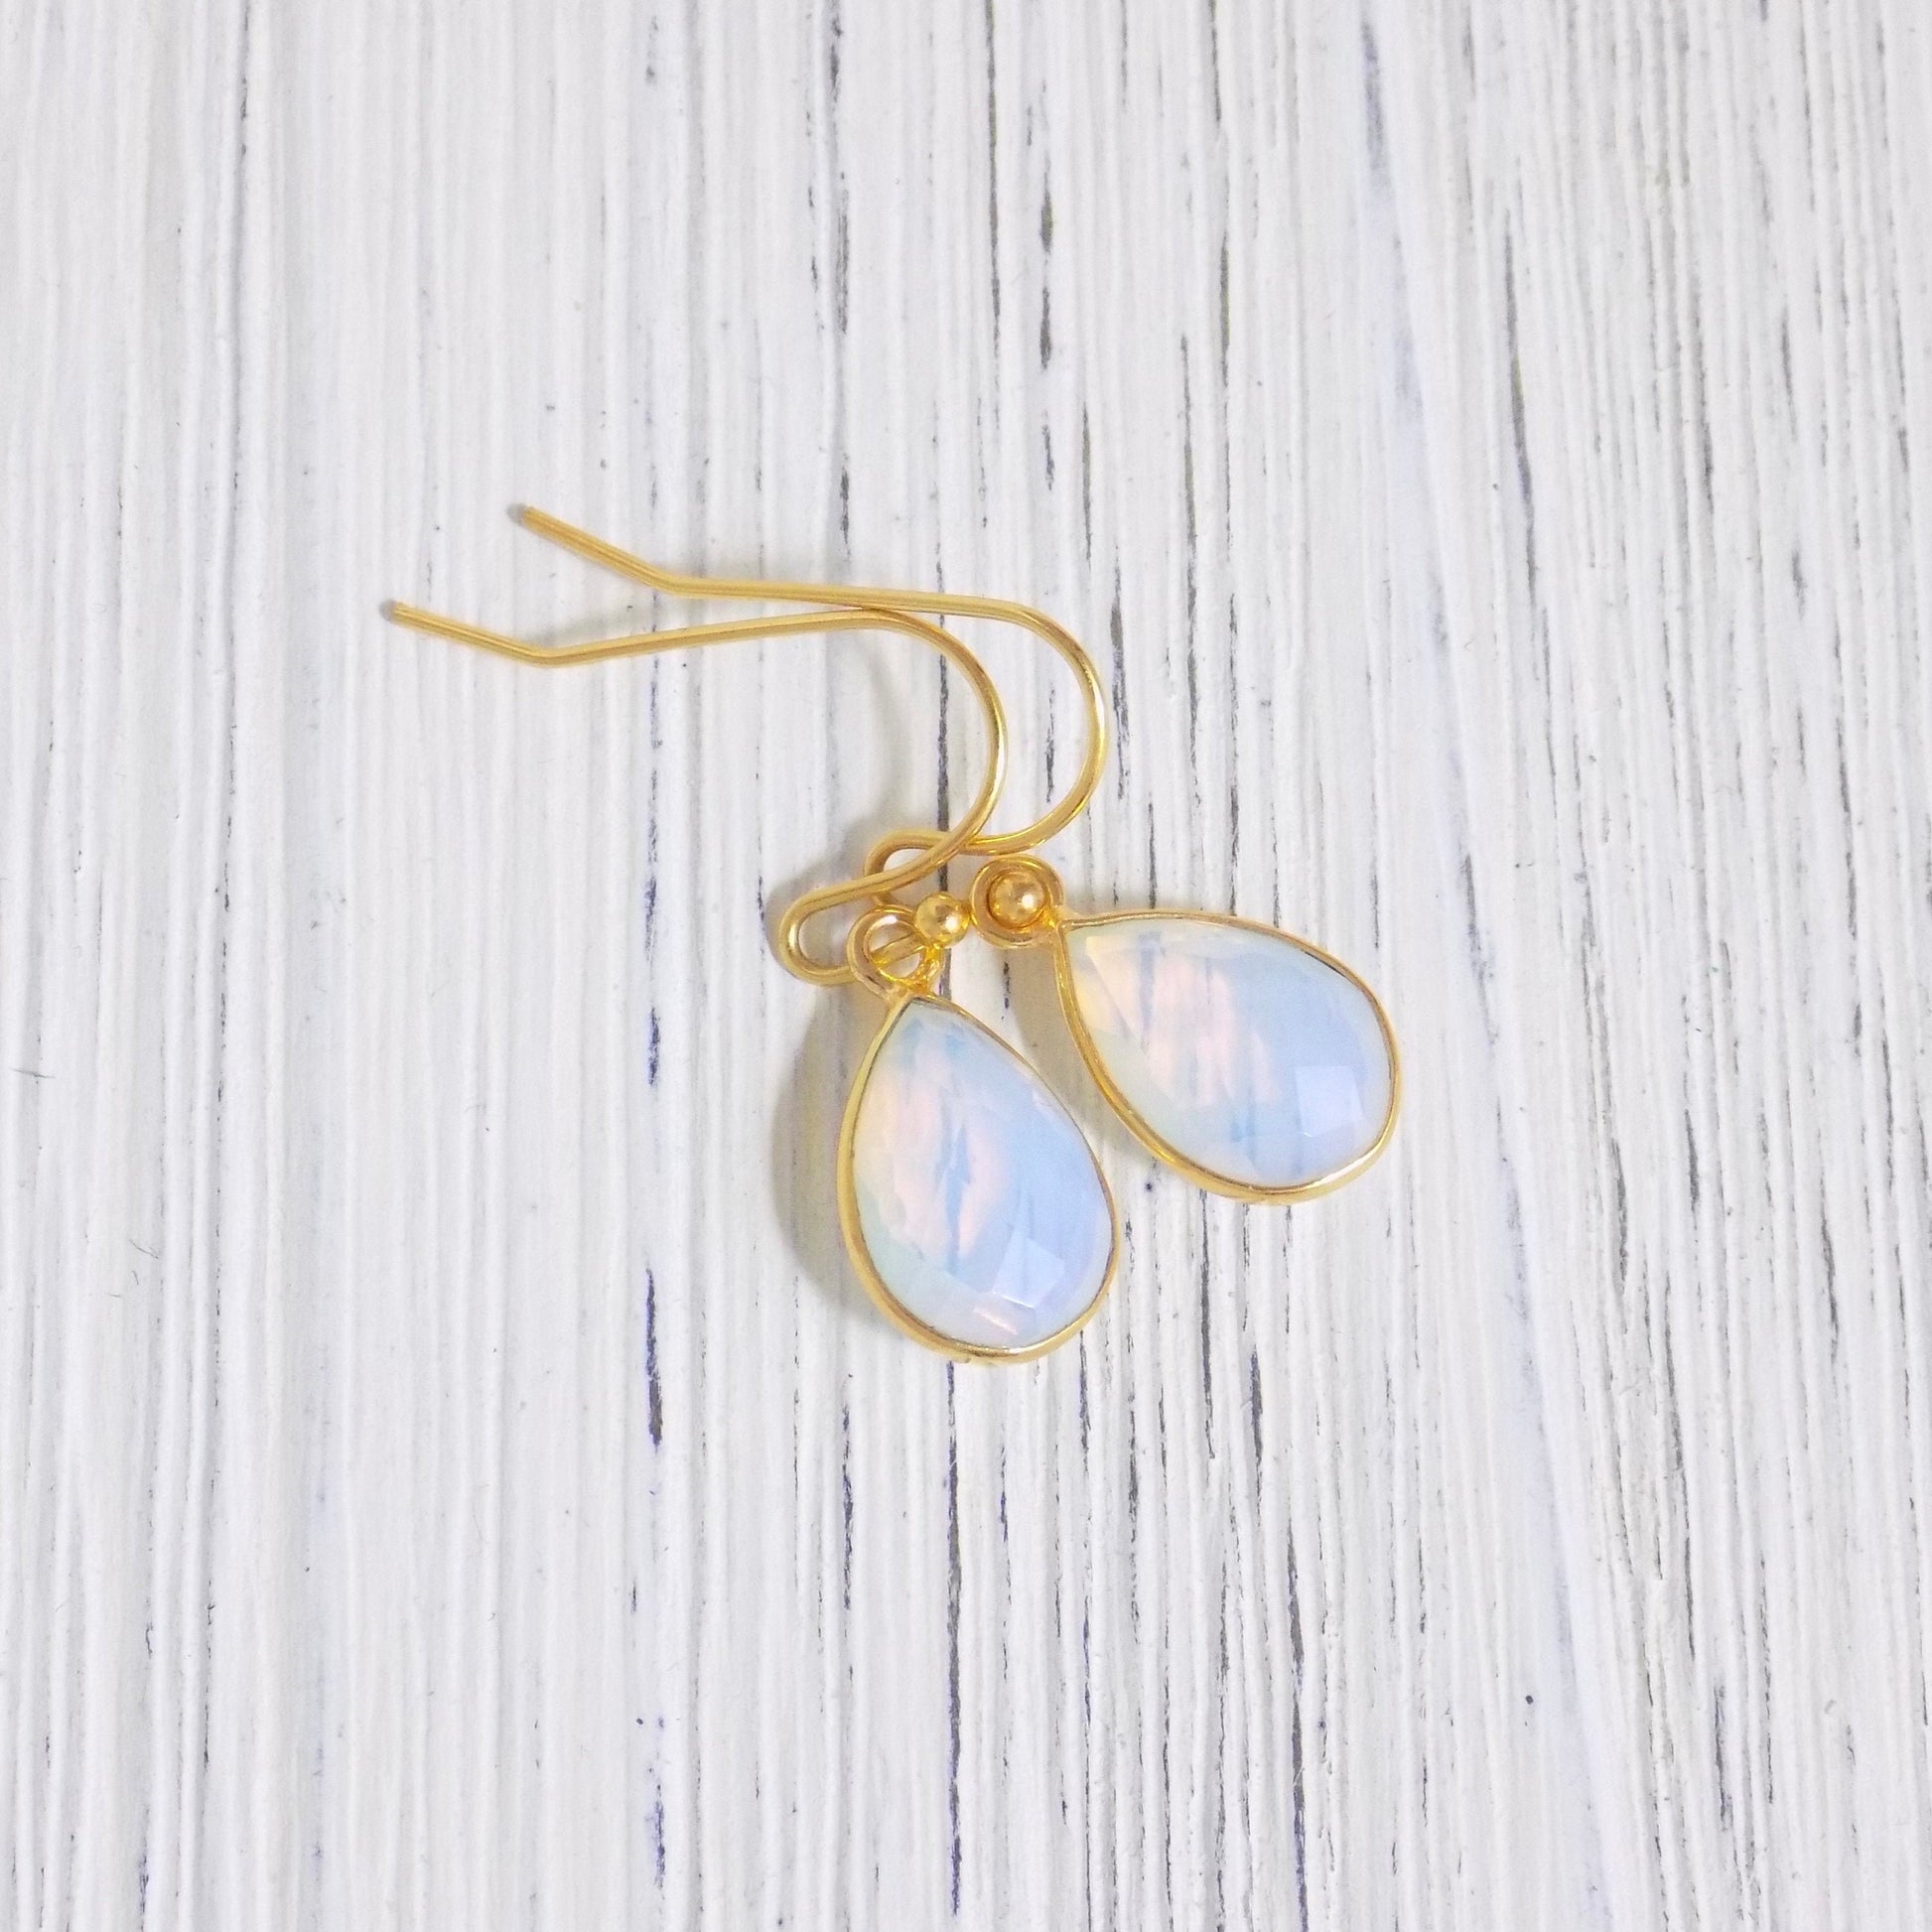 Mothers Day Gift, Opal Earrings Gold, Opalite Earring, Small Light Blue Crystal Earrings, Bridal Jewelry, Gifts For Wife, M4-64